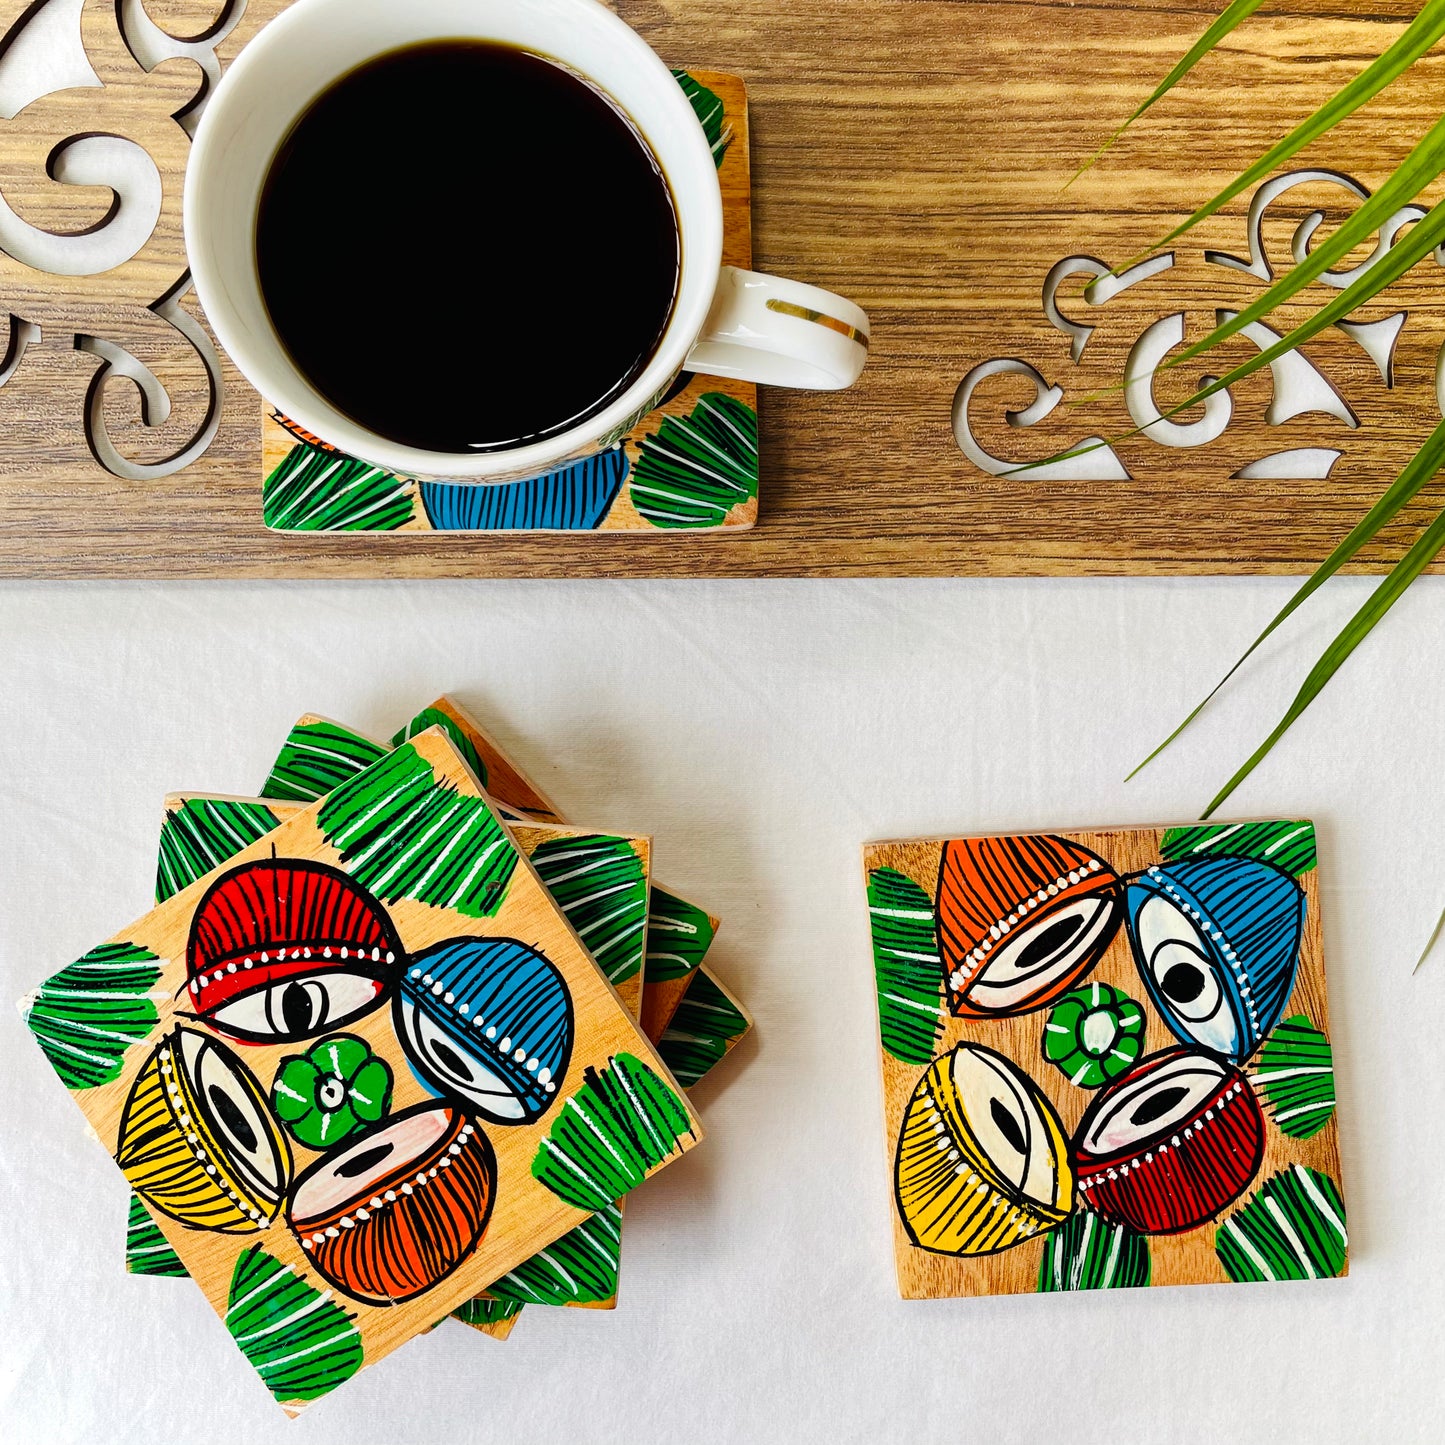 Alokya - 100% natural, Pattachitra painted terracotta coasters - Square coasters: Lotus painted on the surface. Set of five.